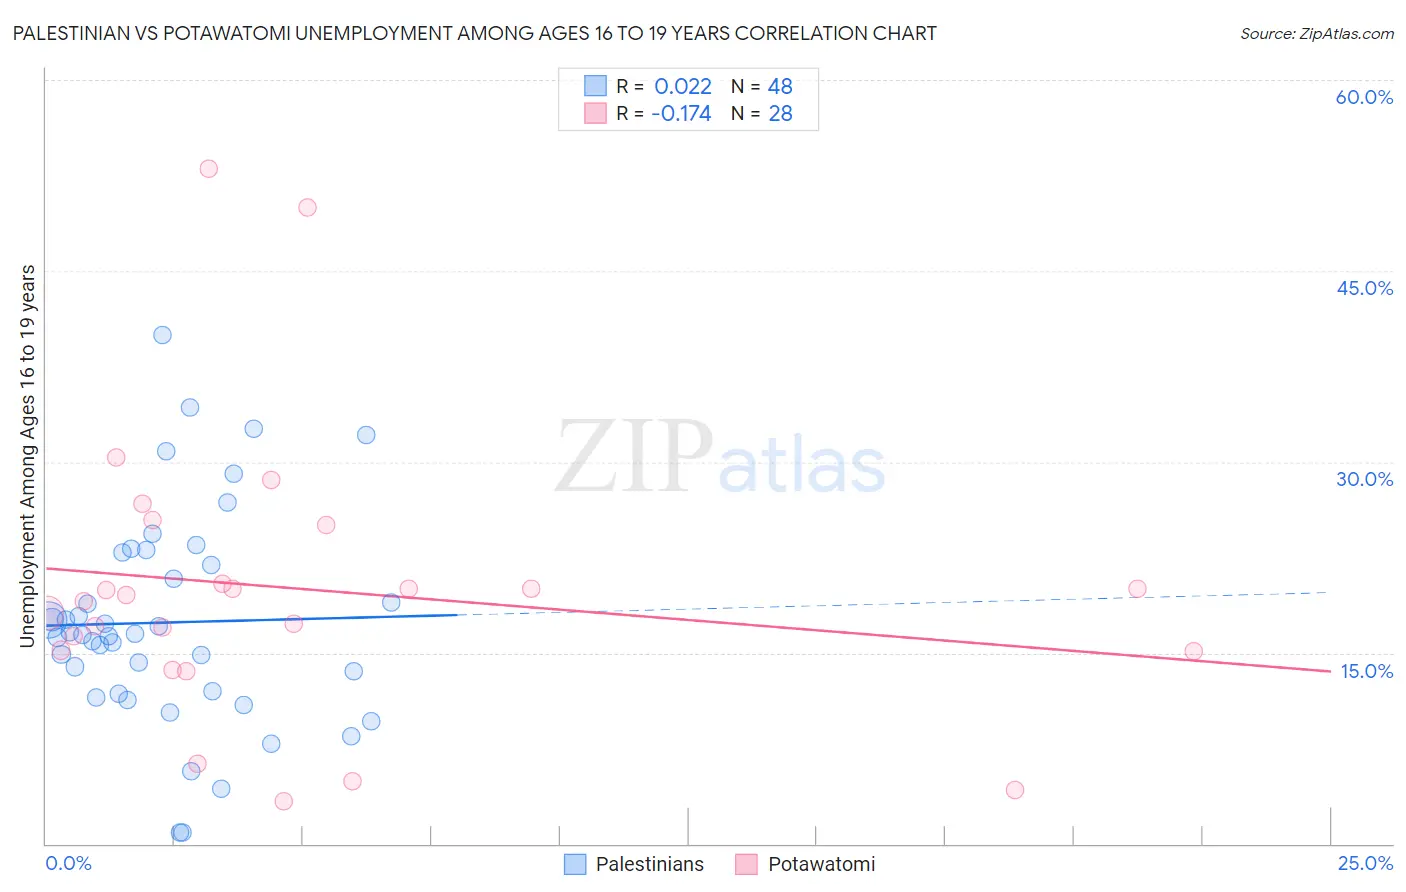 Palestinian vs Potawatomi Unemployment Among Ages 16 to 19 years